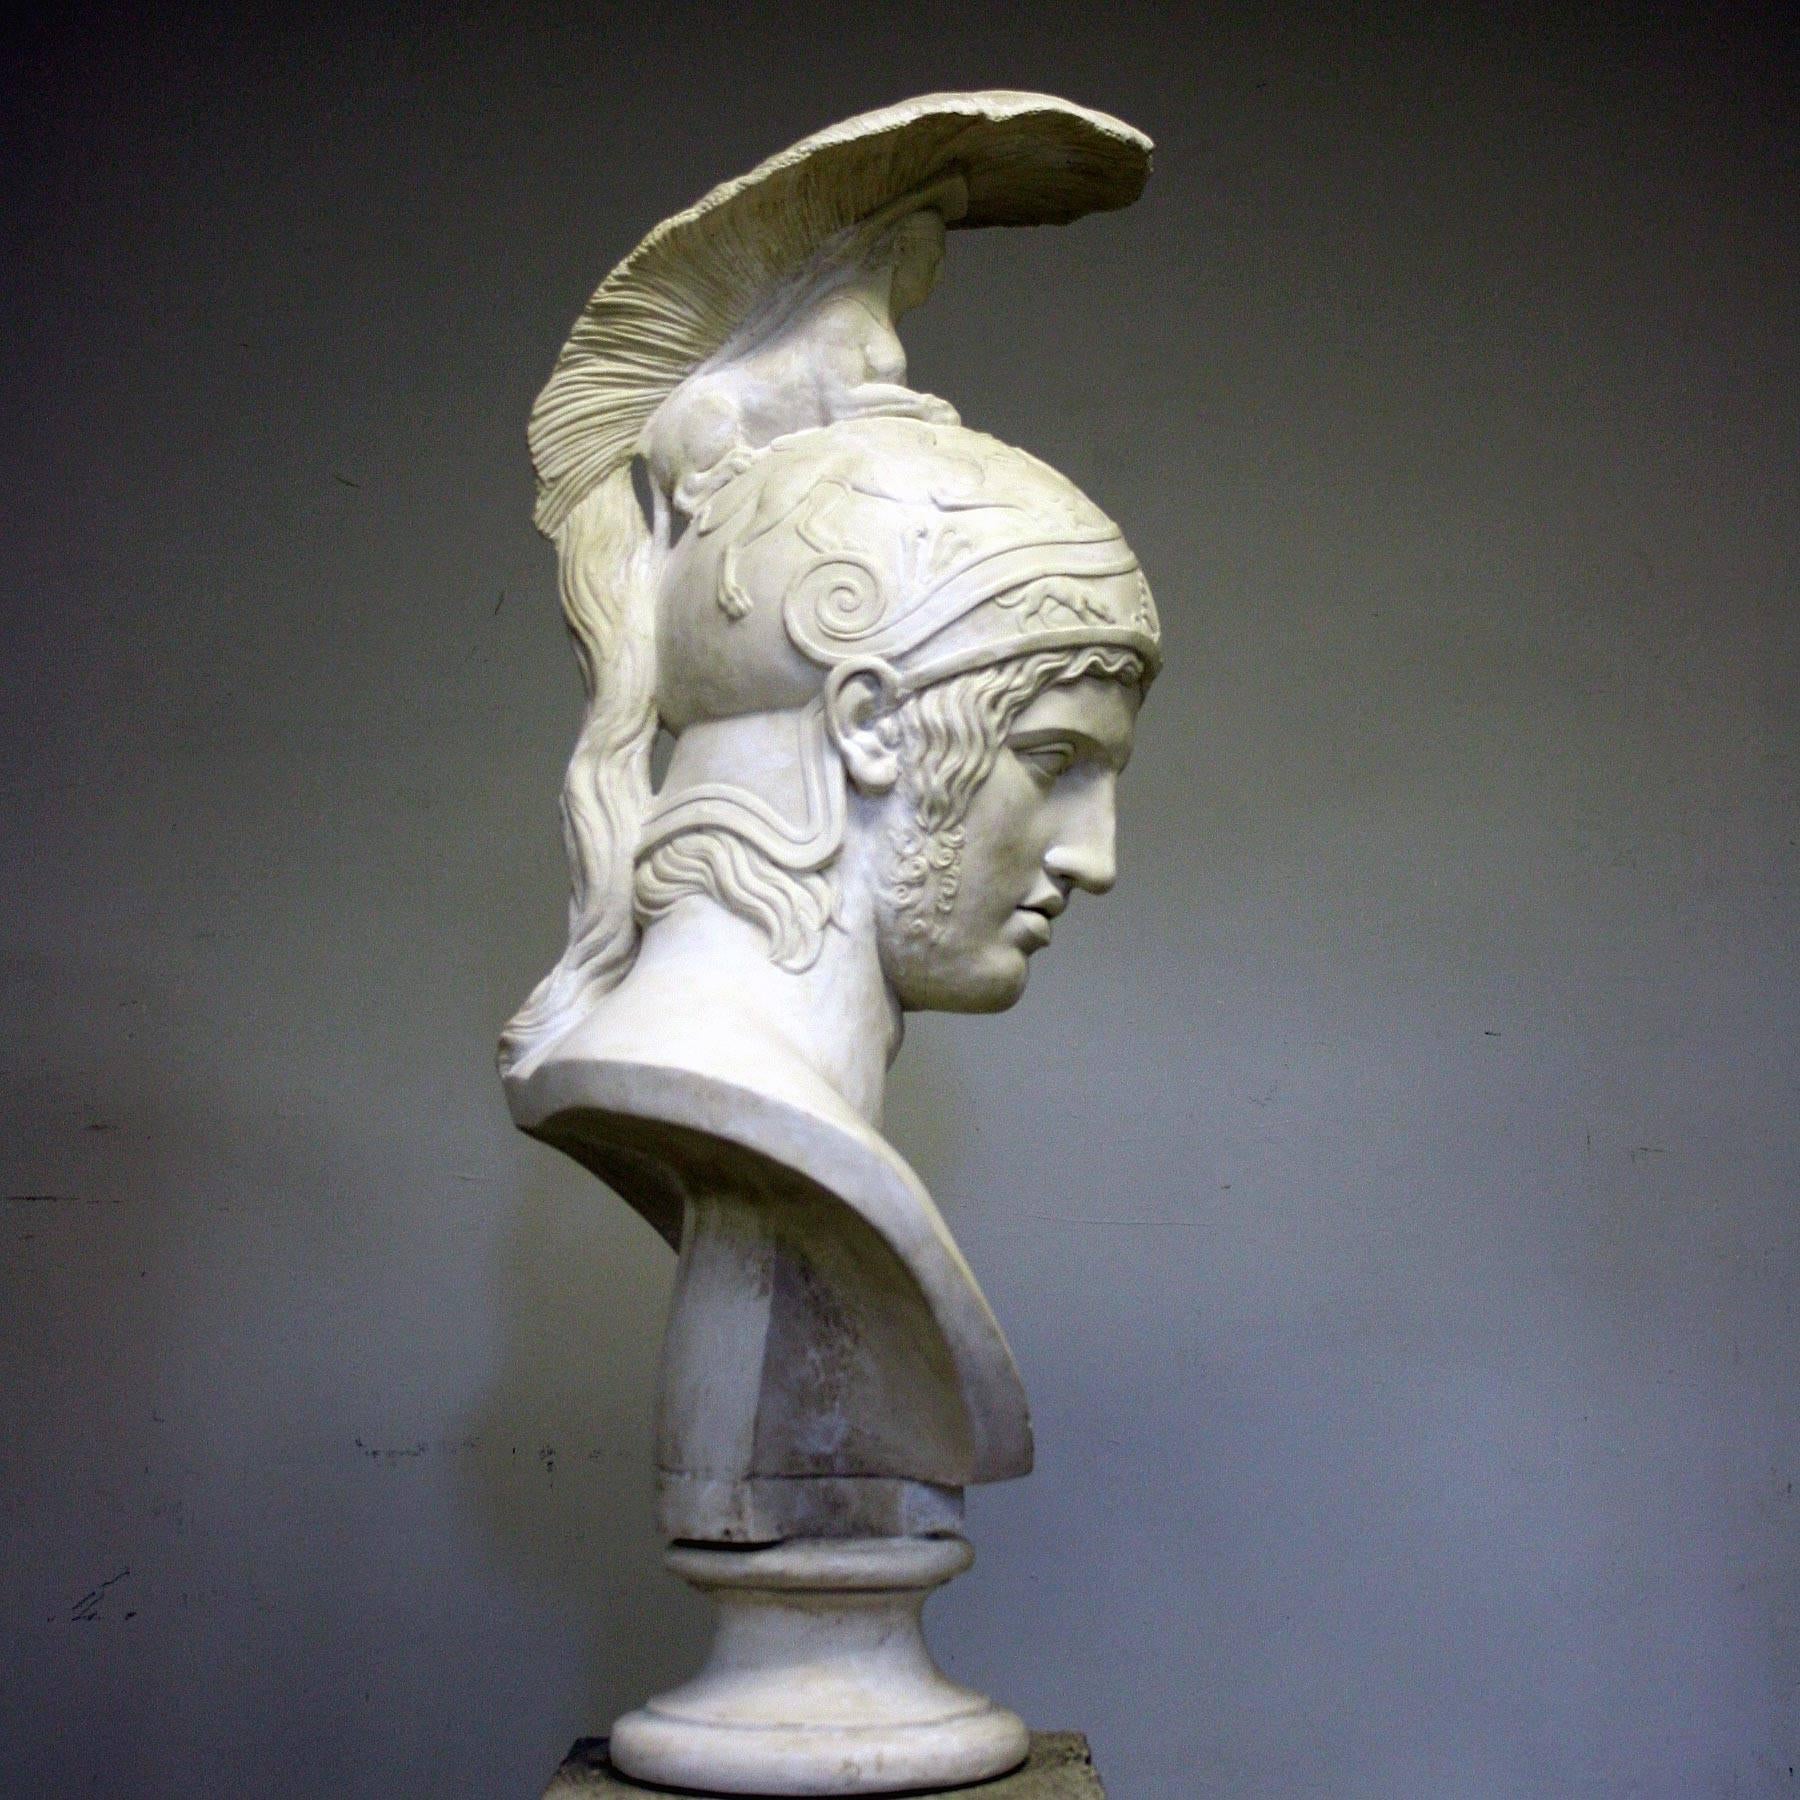 A large and handsome late 20th century resin bust of the God of war, Ares. A really fantastic interior pieces, that would look great up on a plinth or in a centre piece.